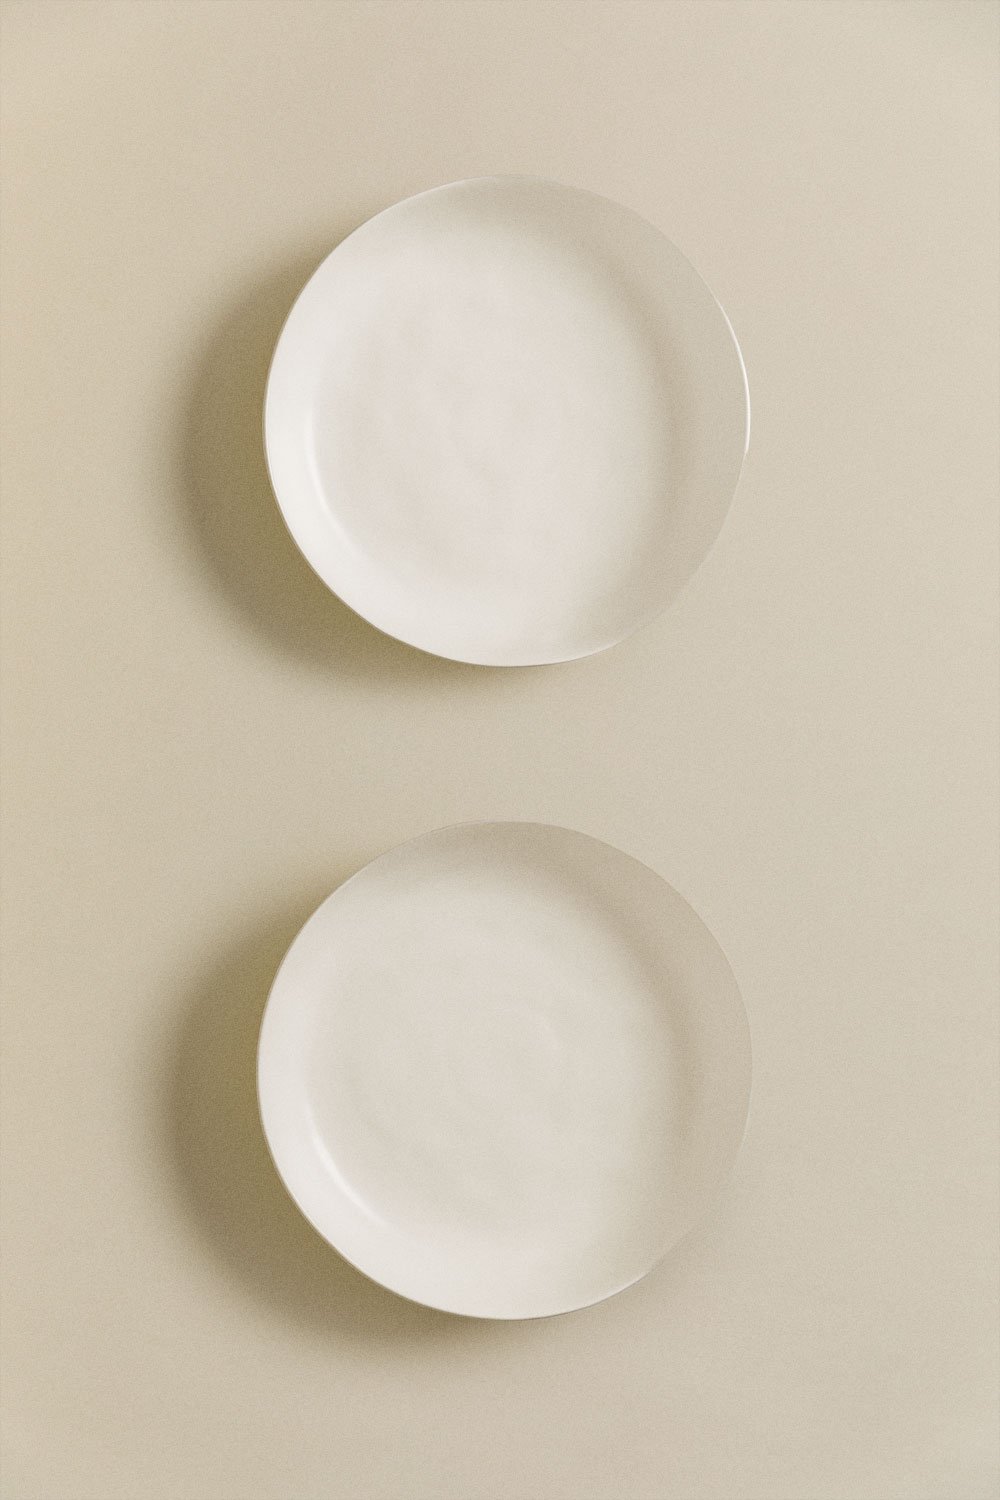 Belvere set of 2 dishes, gallery image 2